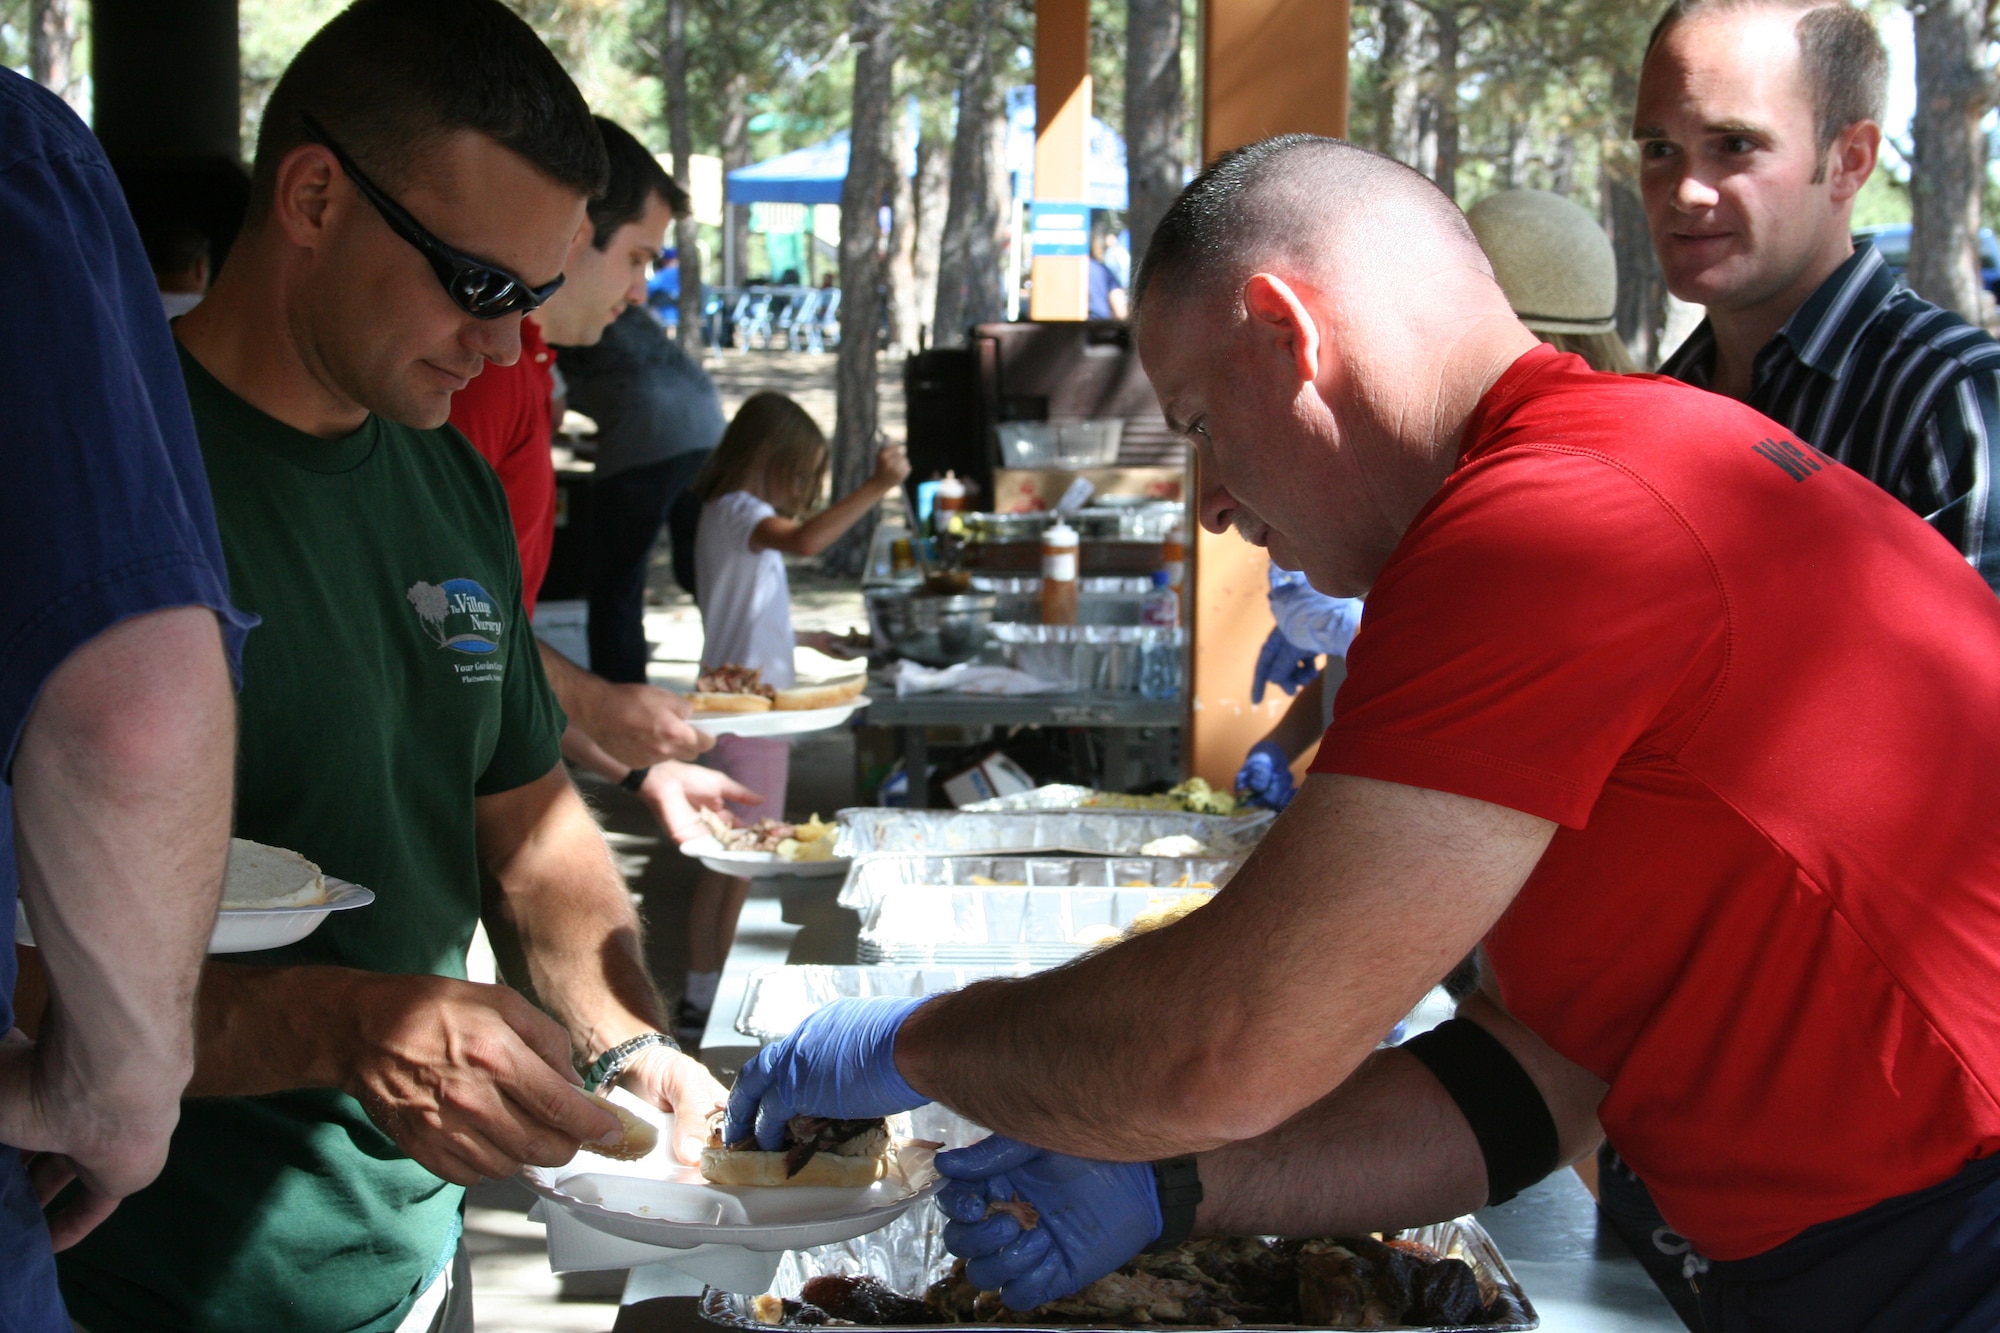 Chief Master Sgt. Rocky Hart (right) threw on the gloves and helped serve lunch from The Firehouse to Maj. Darin Durand  Sept. 12 at the 310th Space Wing?s southern units family day. This year?s family day was held at the Air Force Academy?s FamCamp.  (U.S. Air Force Photo/ Staff Sgt. Desiree Economides)